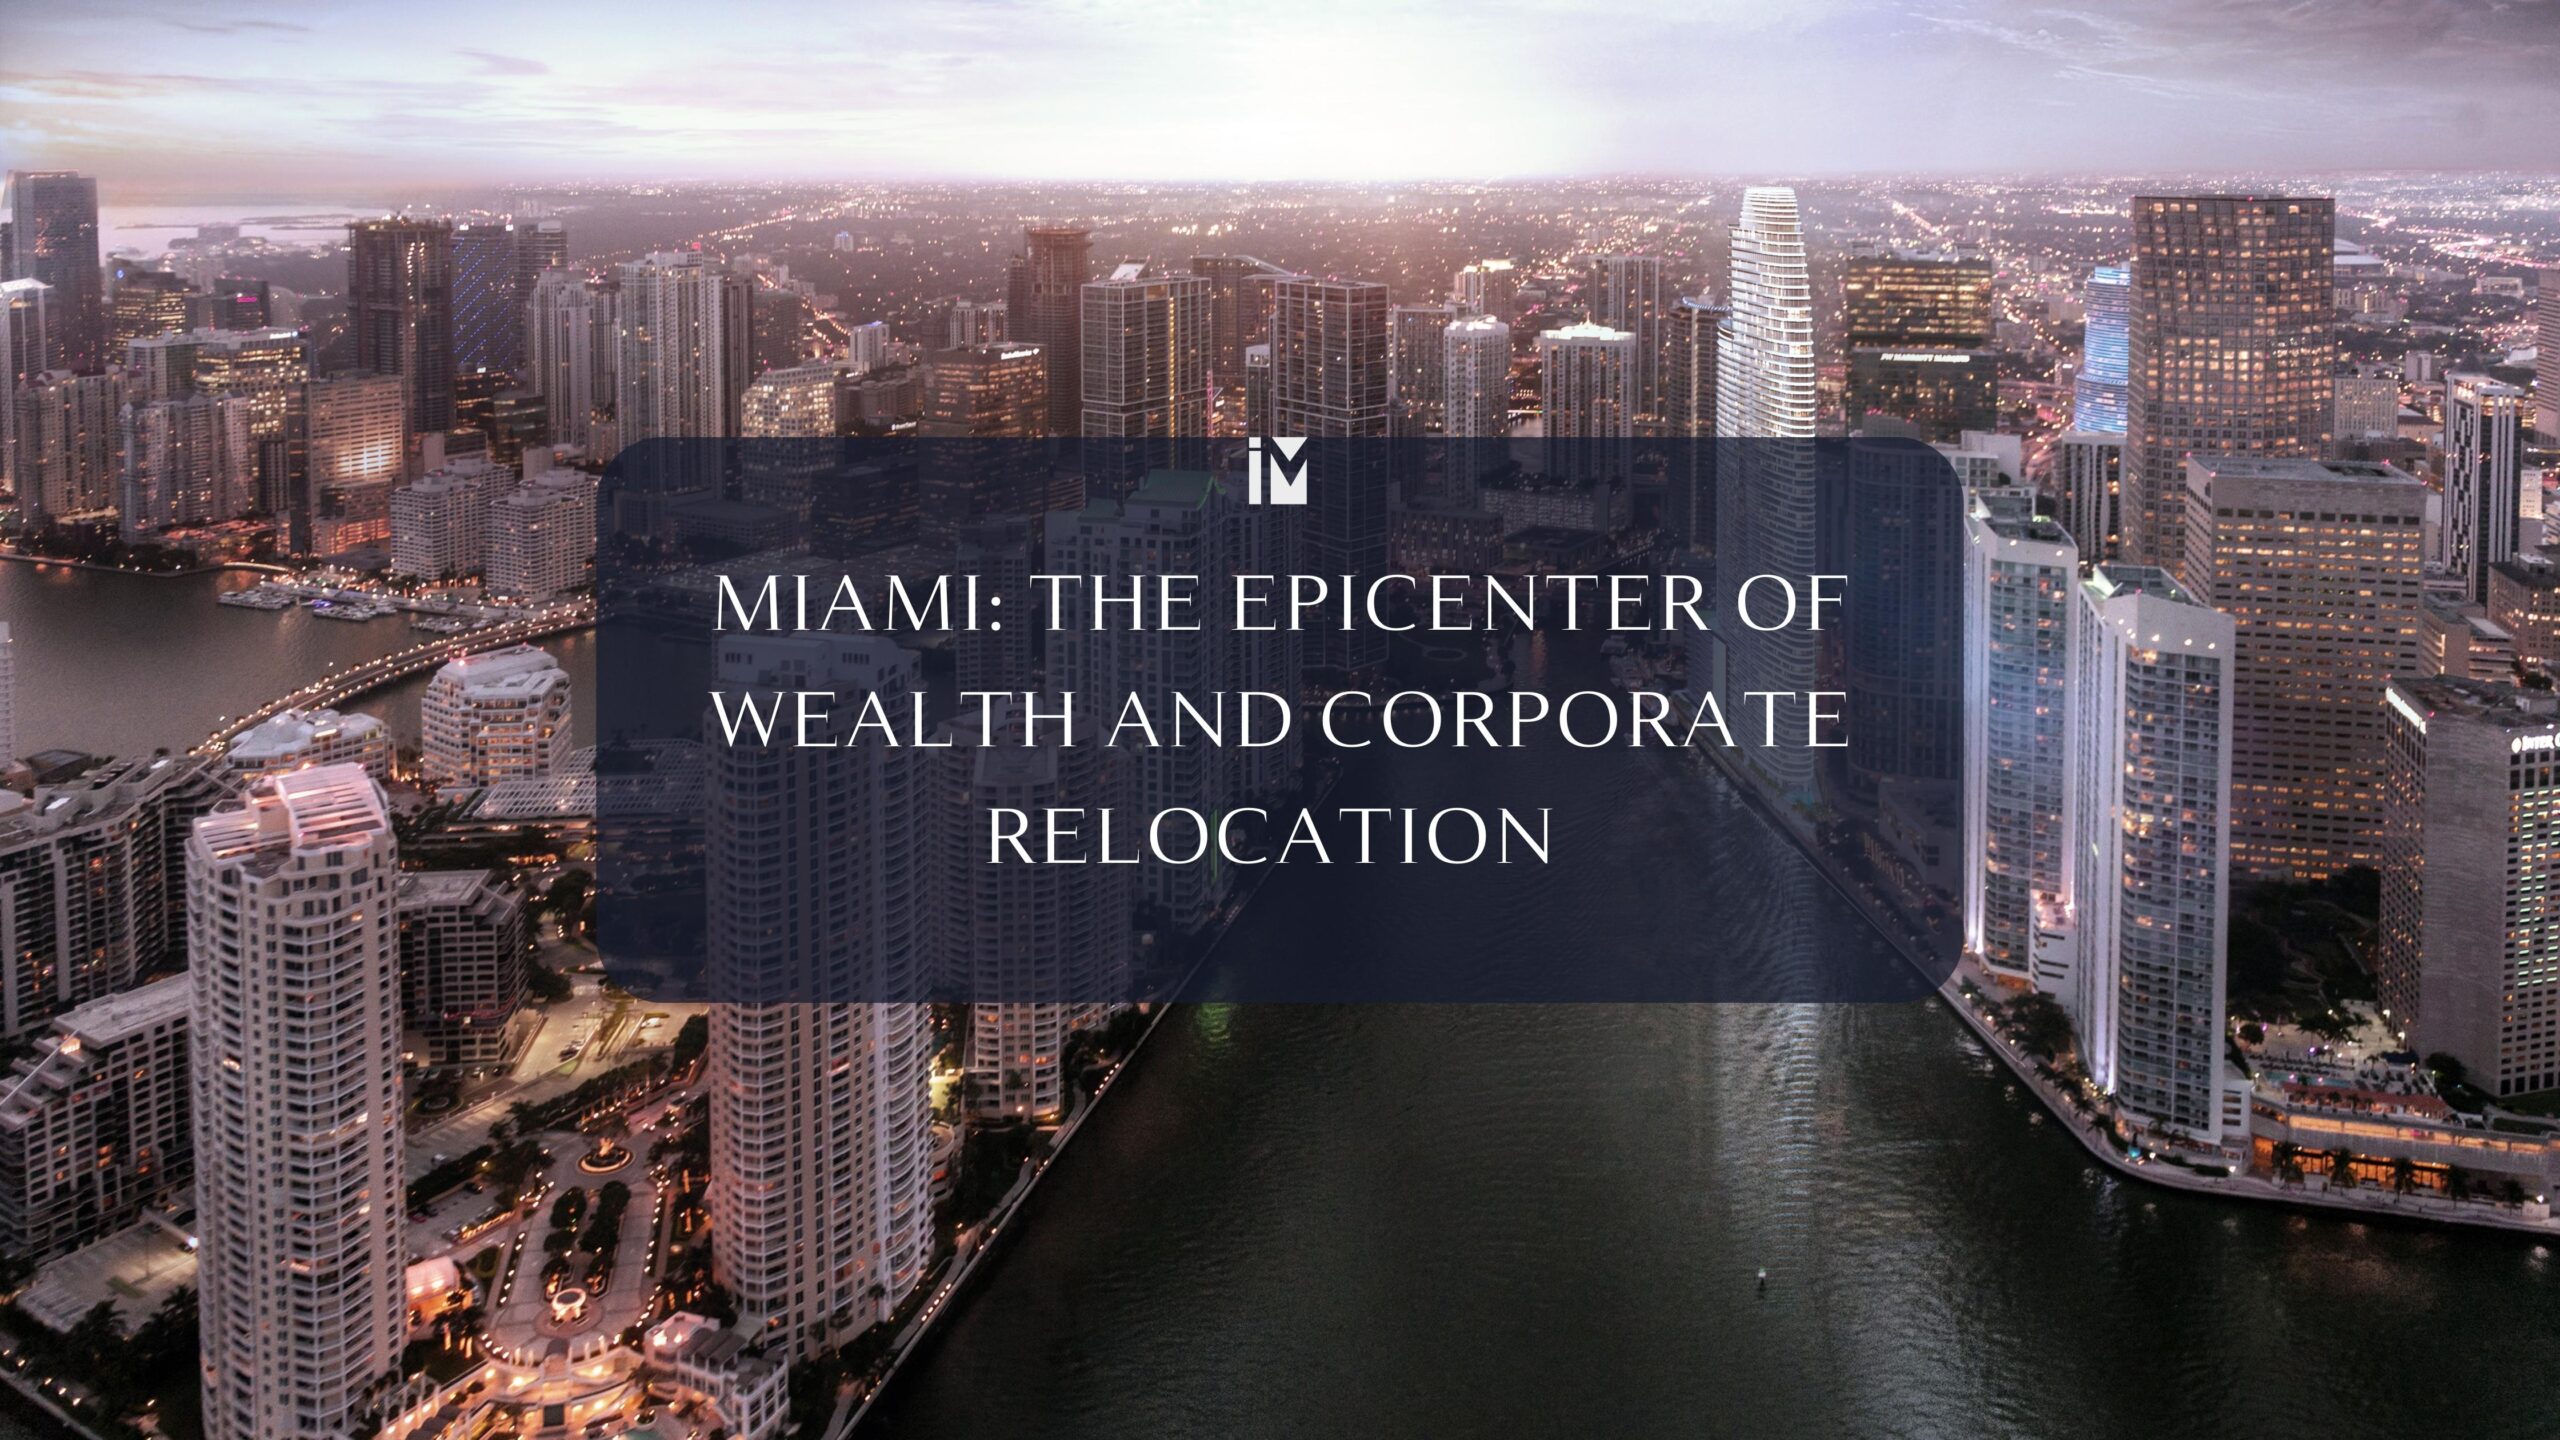 South Florida Attracts Wealthy Elite And Corporate Giants